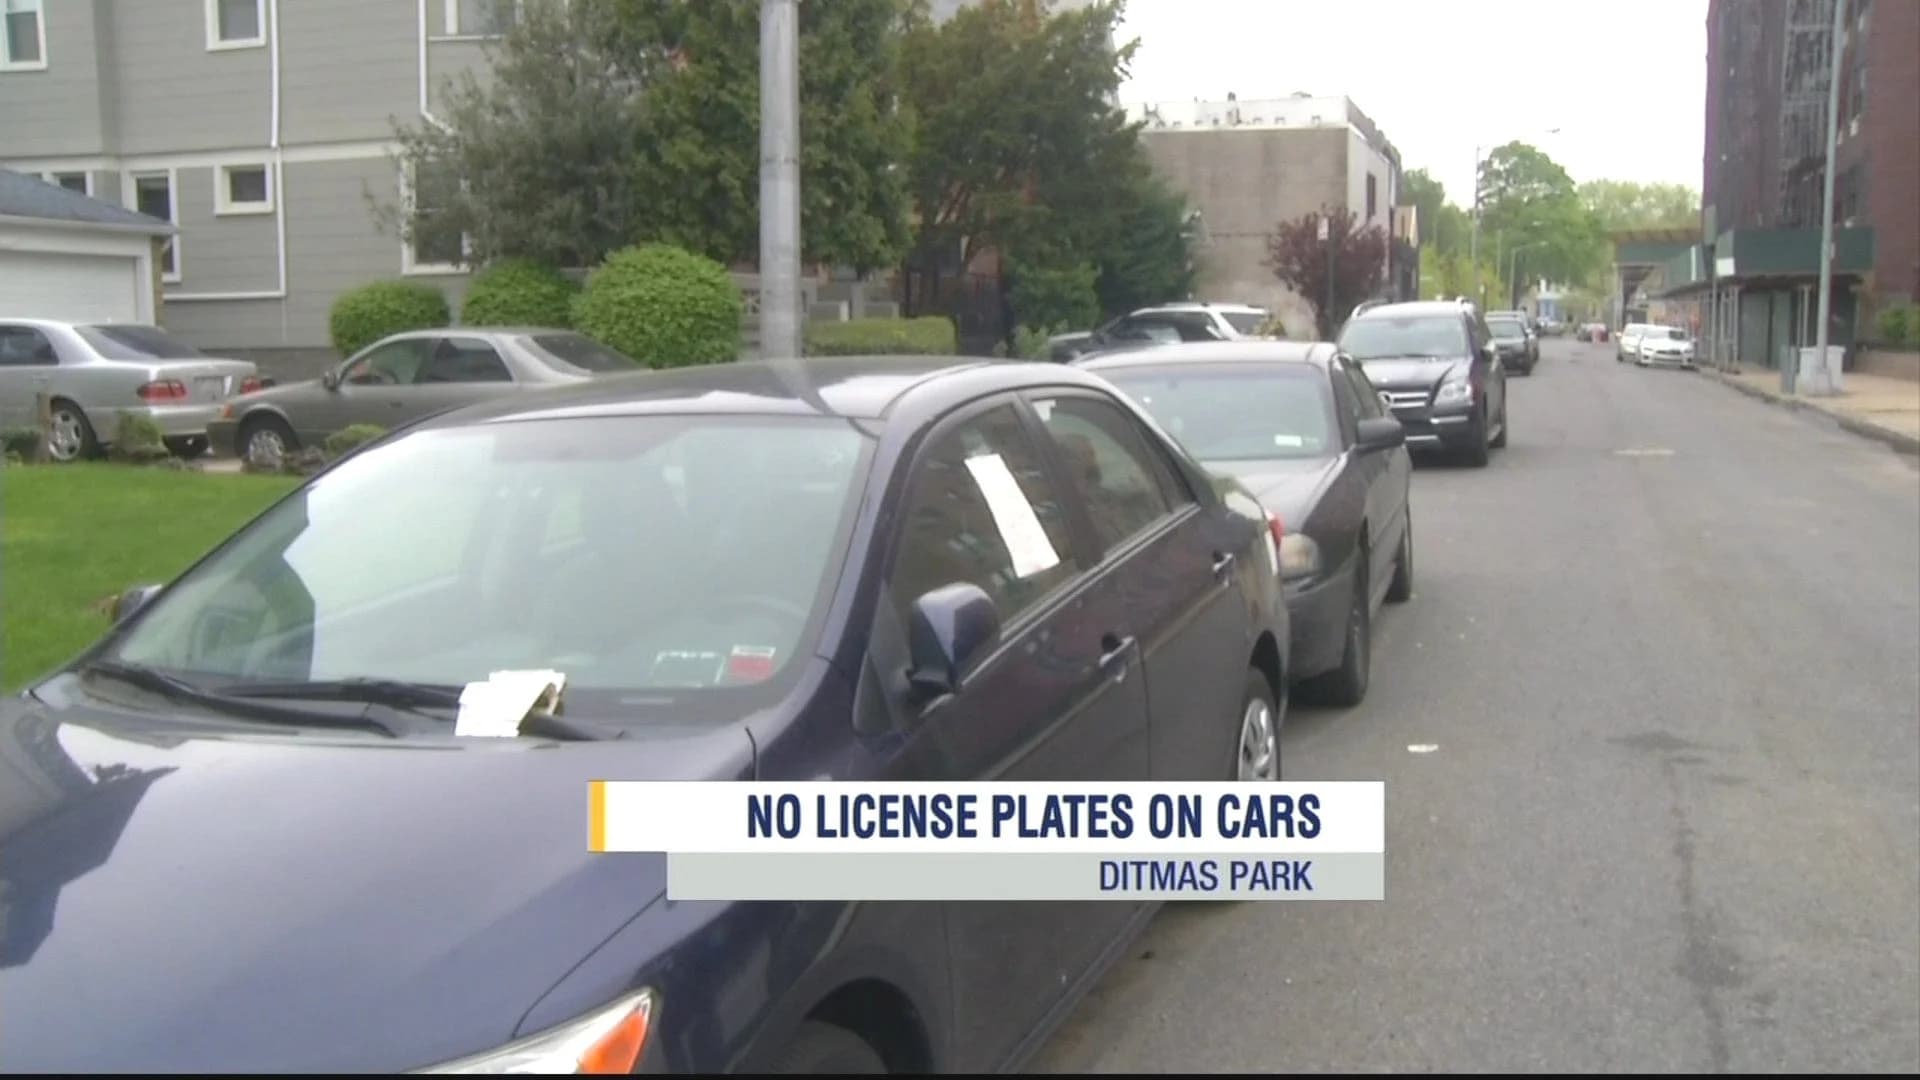 Residents complain about abandoned cars in Ditmas Park